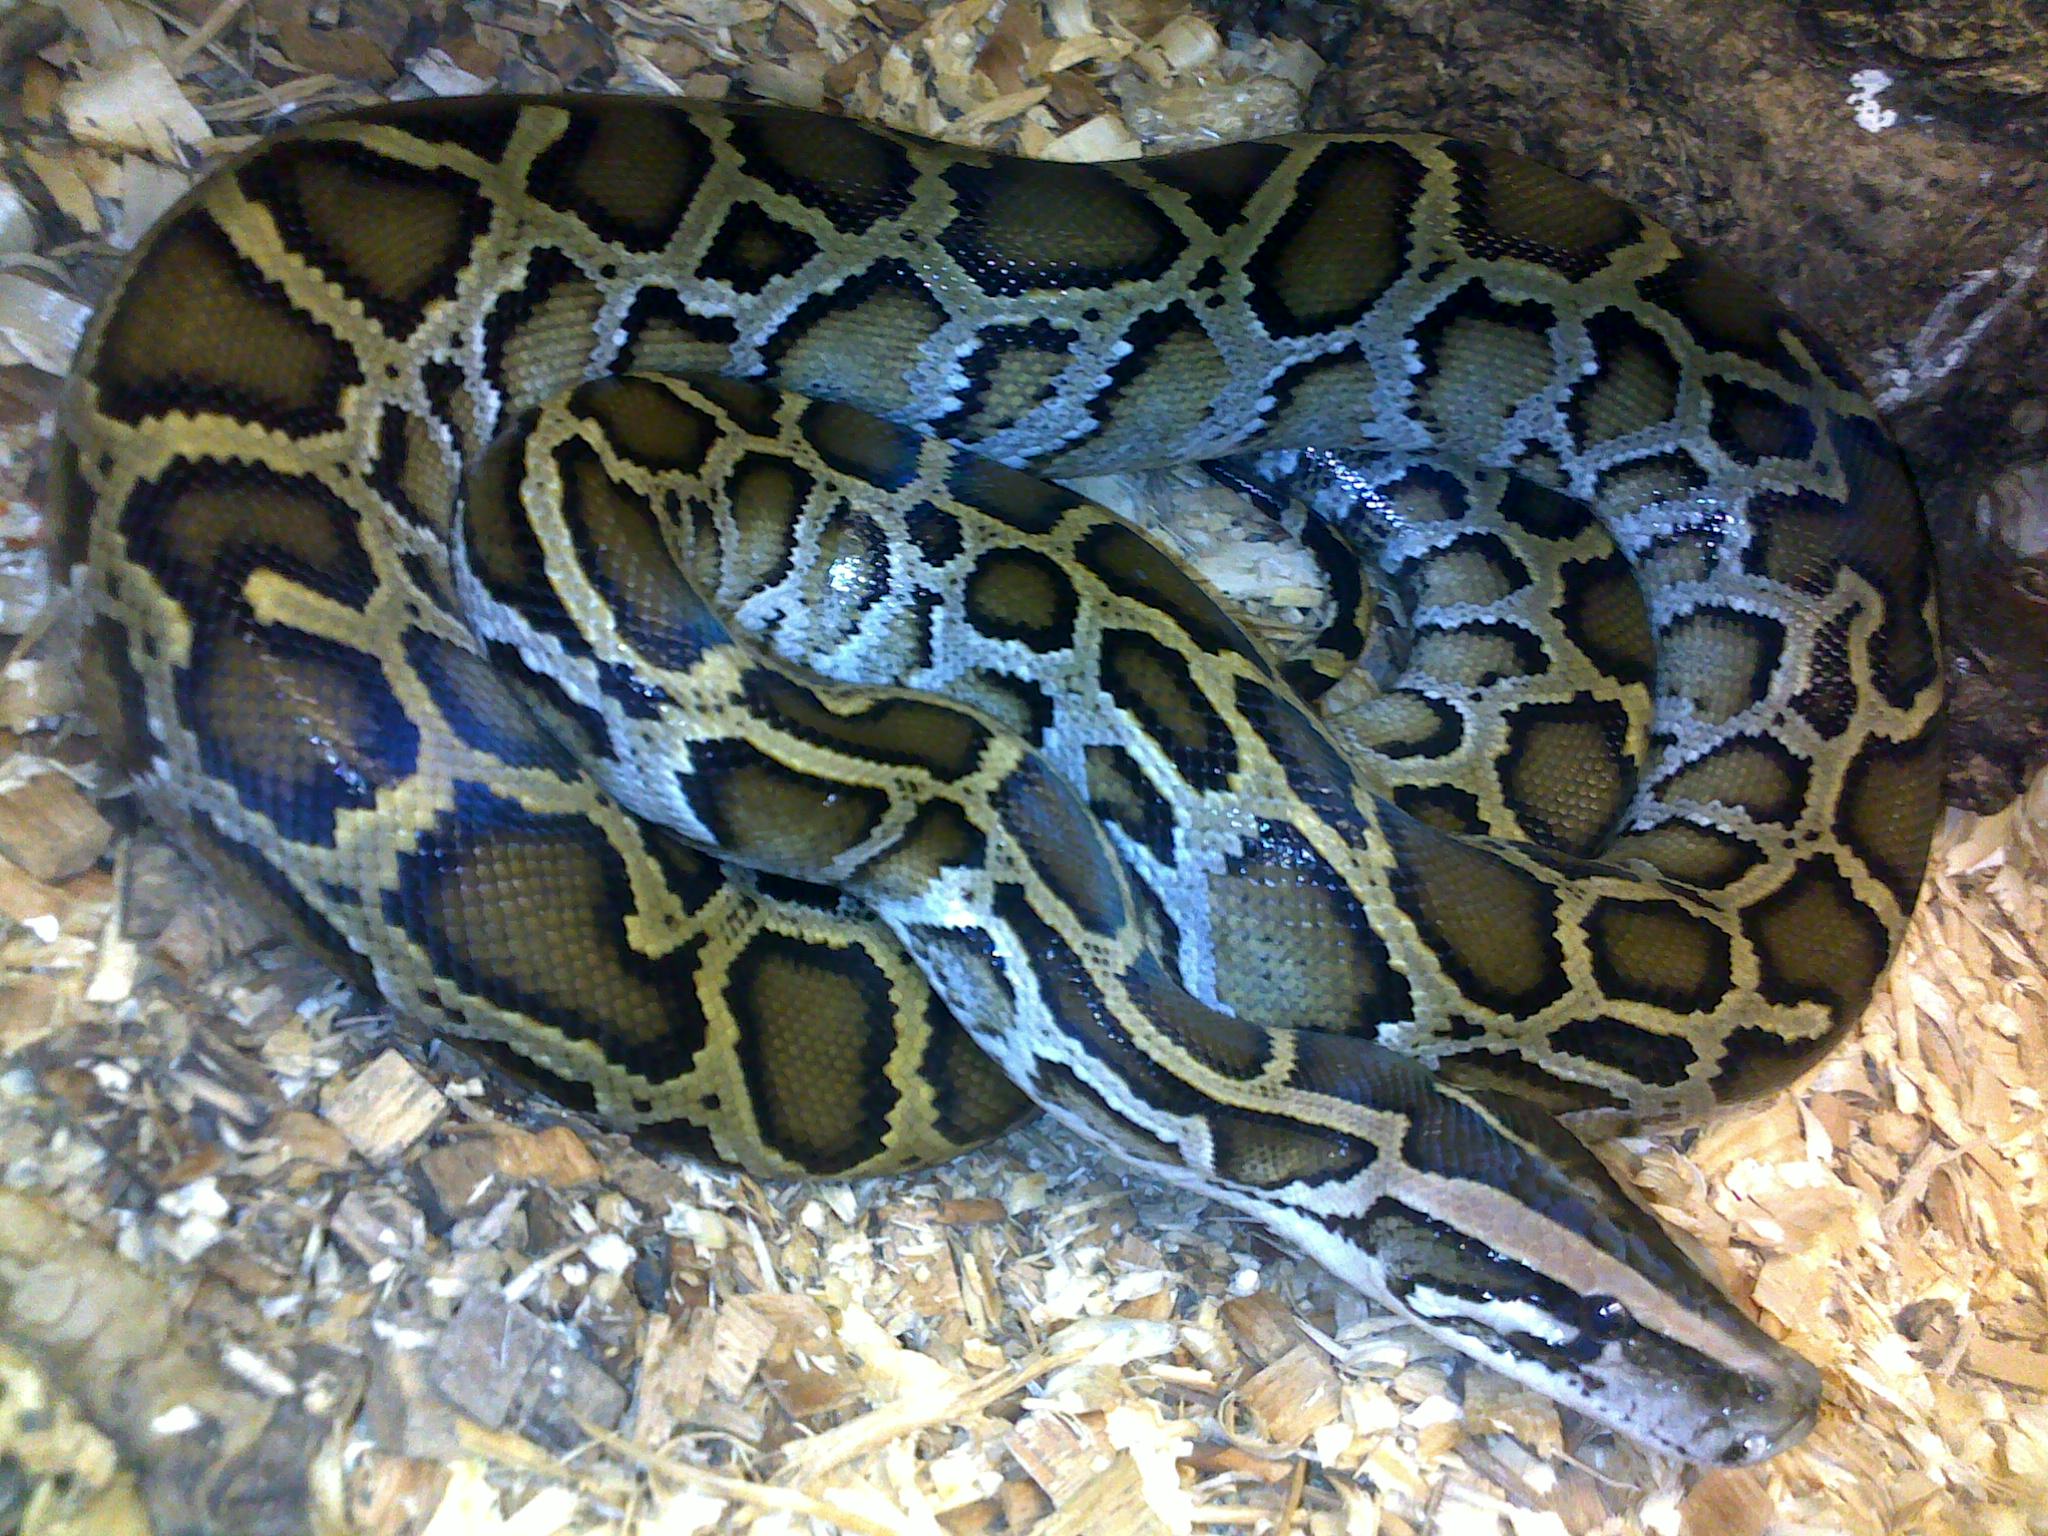 a large normal phase burmese python curled up